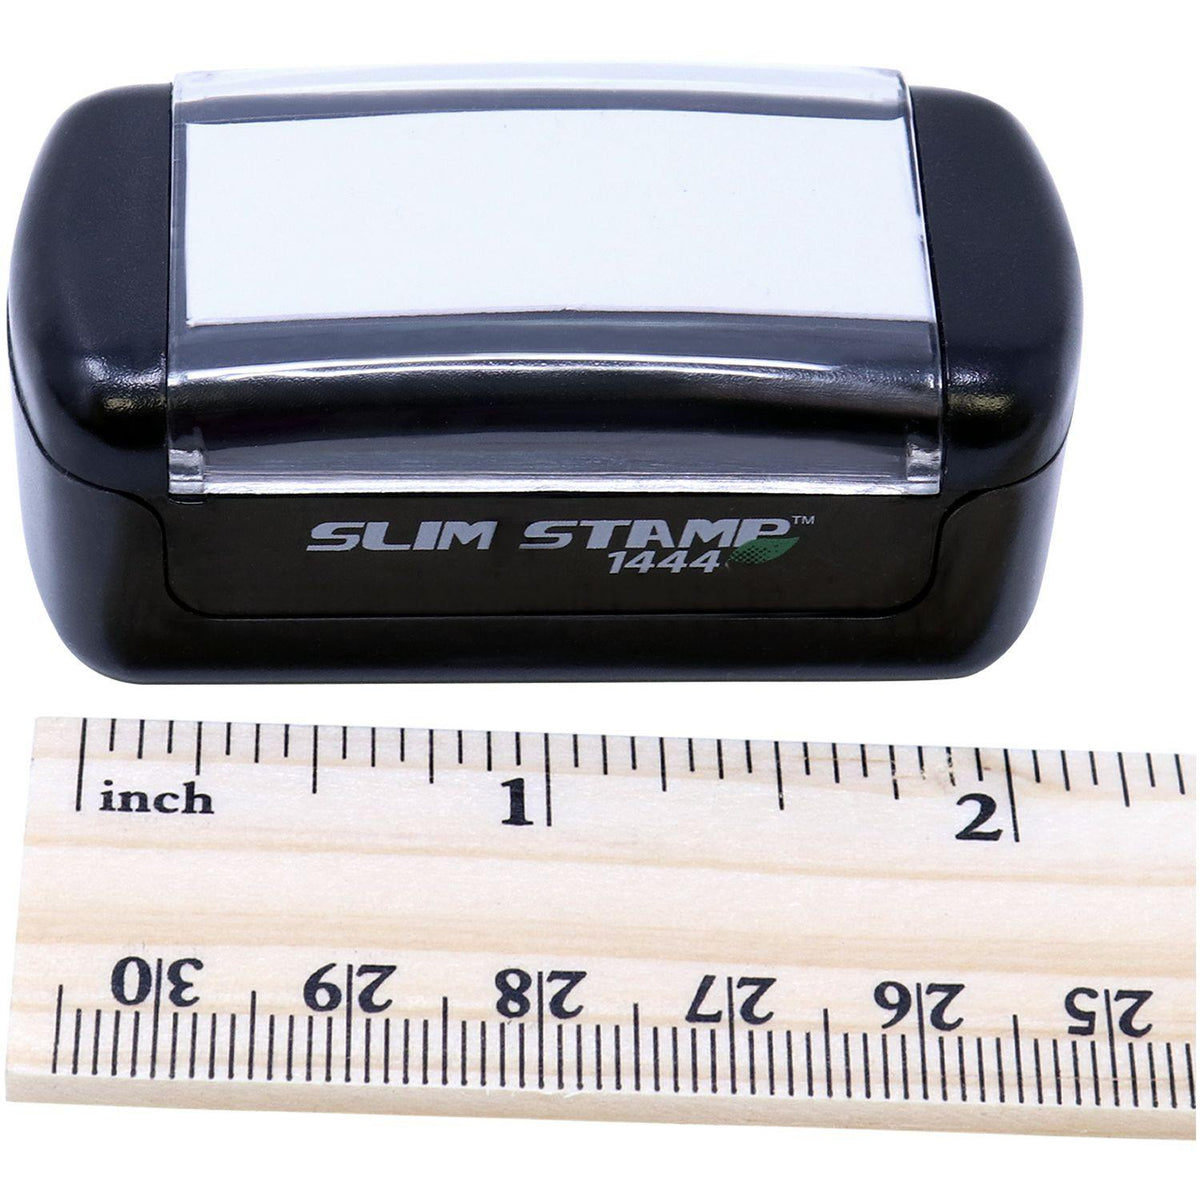 Measurement Slim Pre-Inked Draft with Letter Stamp with Ruler